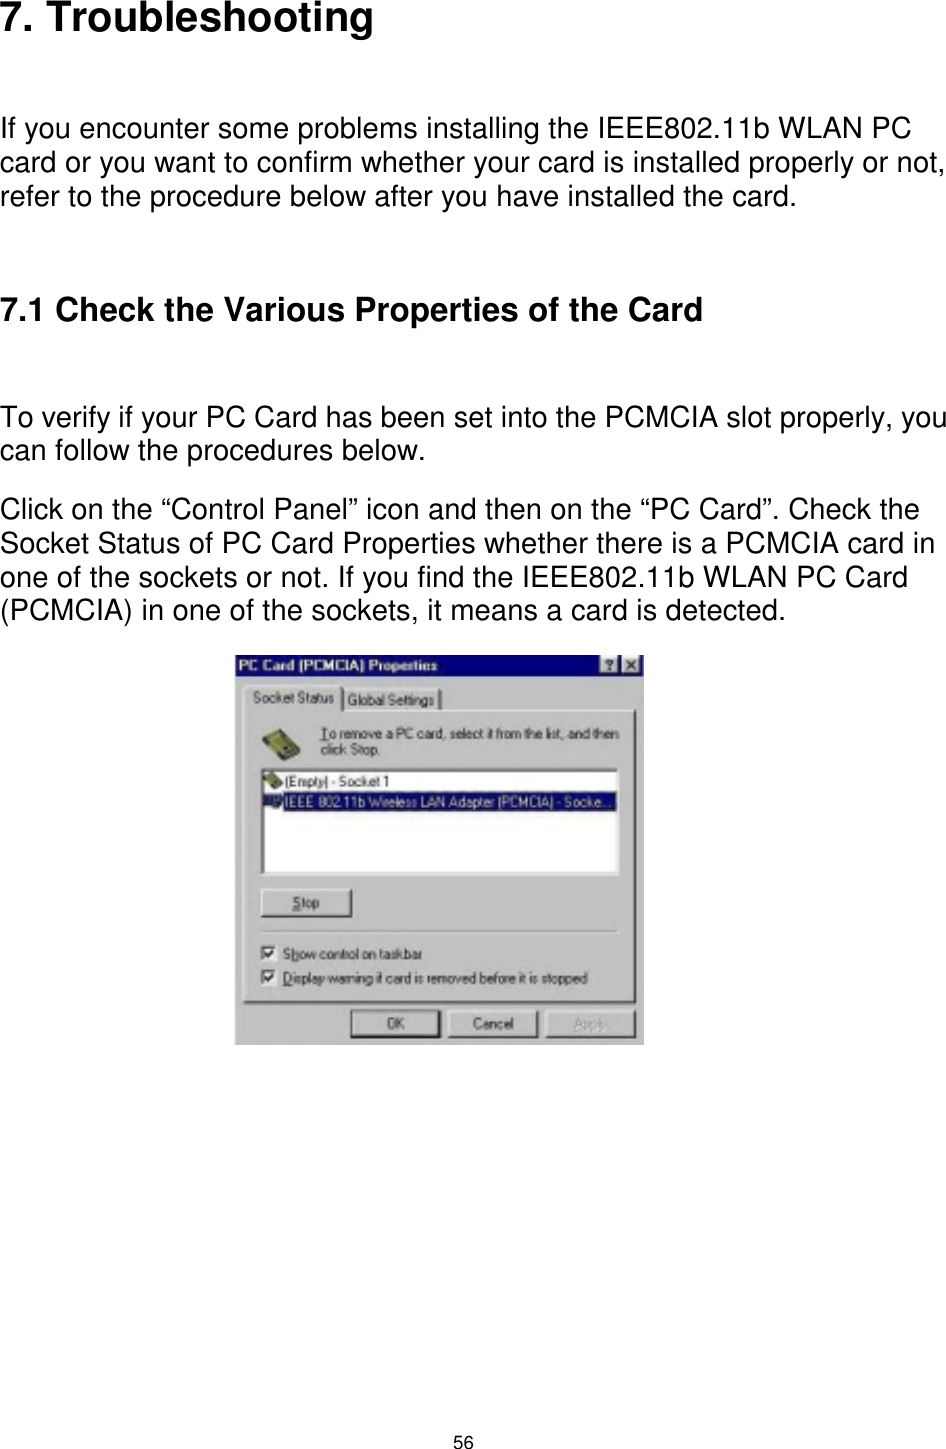  56 7. Troubleshooting   If you encounter some problems installing the IEEE802.11b WLAN PC card or you want to confirm whether your card is installed properly or not, refer to the procedure below after you have installed the card.  7.1 Check the Various Properties of the Card  To verify if your PC Card has been set into the PCMCIA slot properly, you can follow the procedures below.  Click on the “Control Panel” icon and then on the “PC Card”. Check the Socket Status of PC Card Properties whether there is a PCMCIA card in one of the sockets or not. If you find the IEEE802.11b WLAN PC Card (PCMCIA) in one of the sockets, it means a card is detected.               